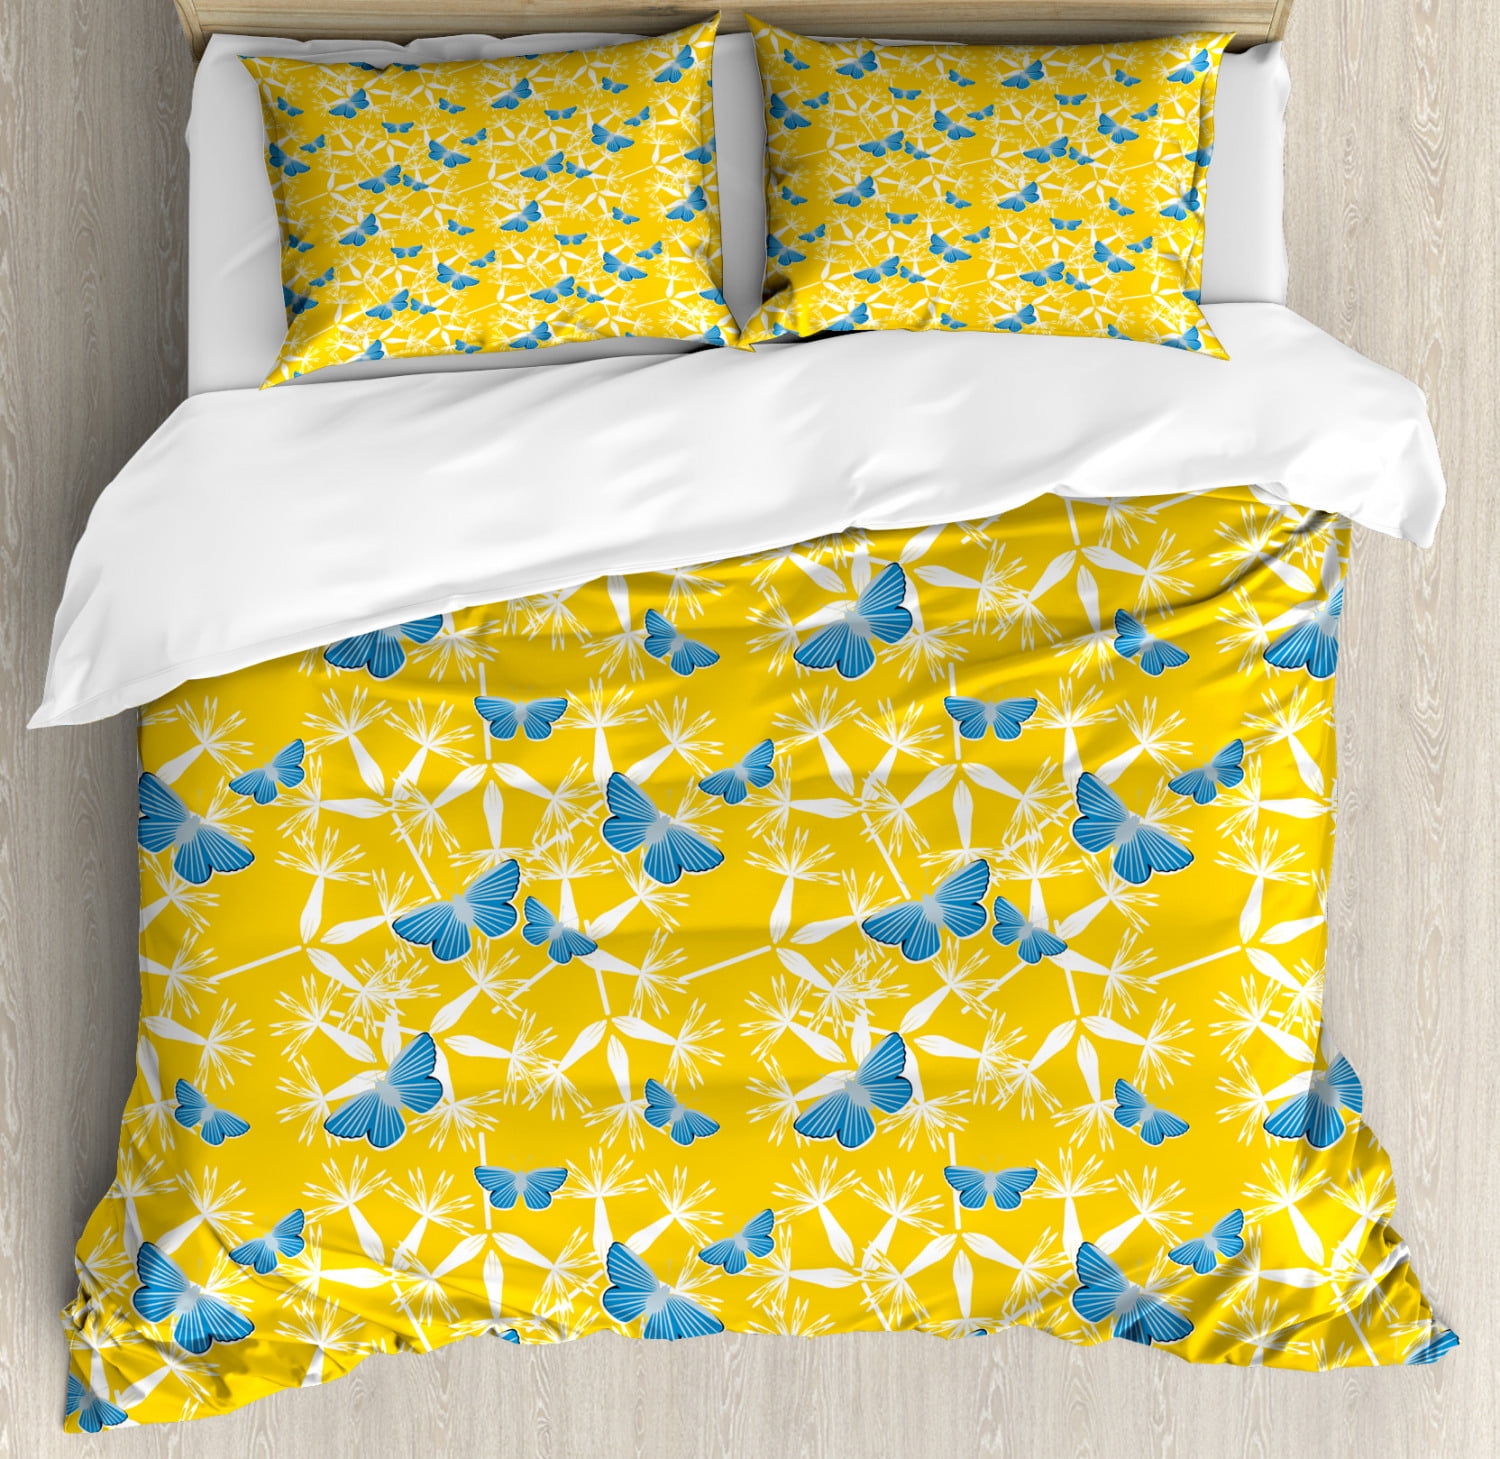 Yellow And Blue King Size Duvet Cover Set Butterflies With